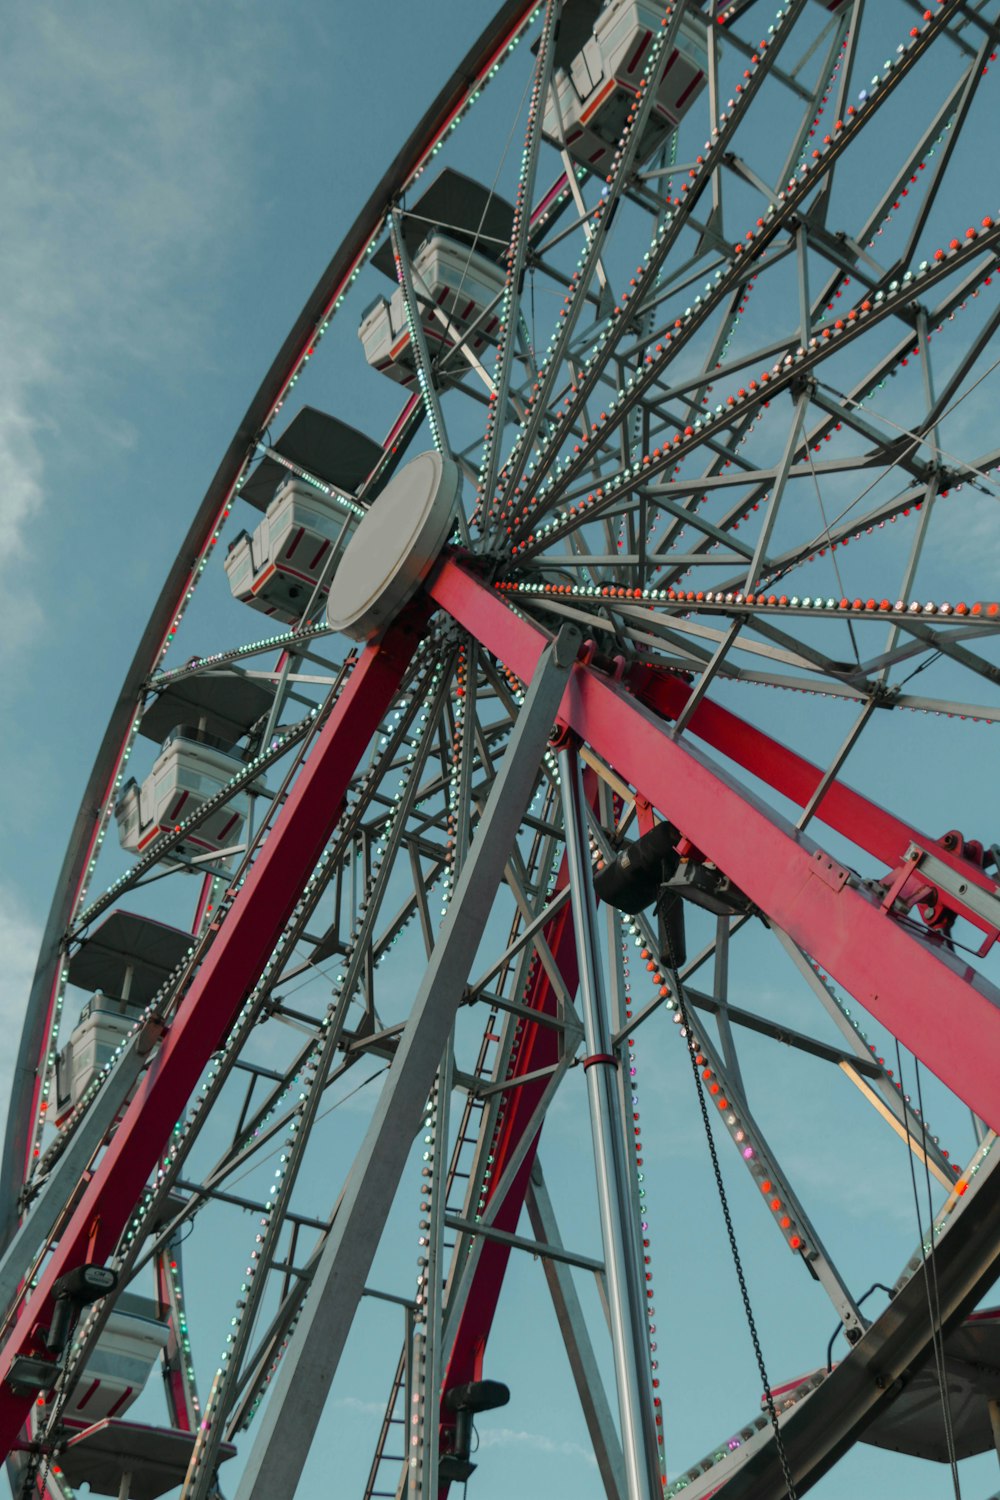 macro photography of red and gray ferris wheel under blue and white sky during daytime